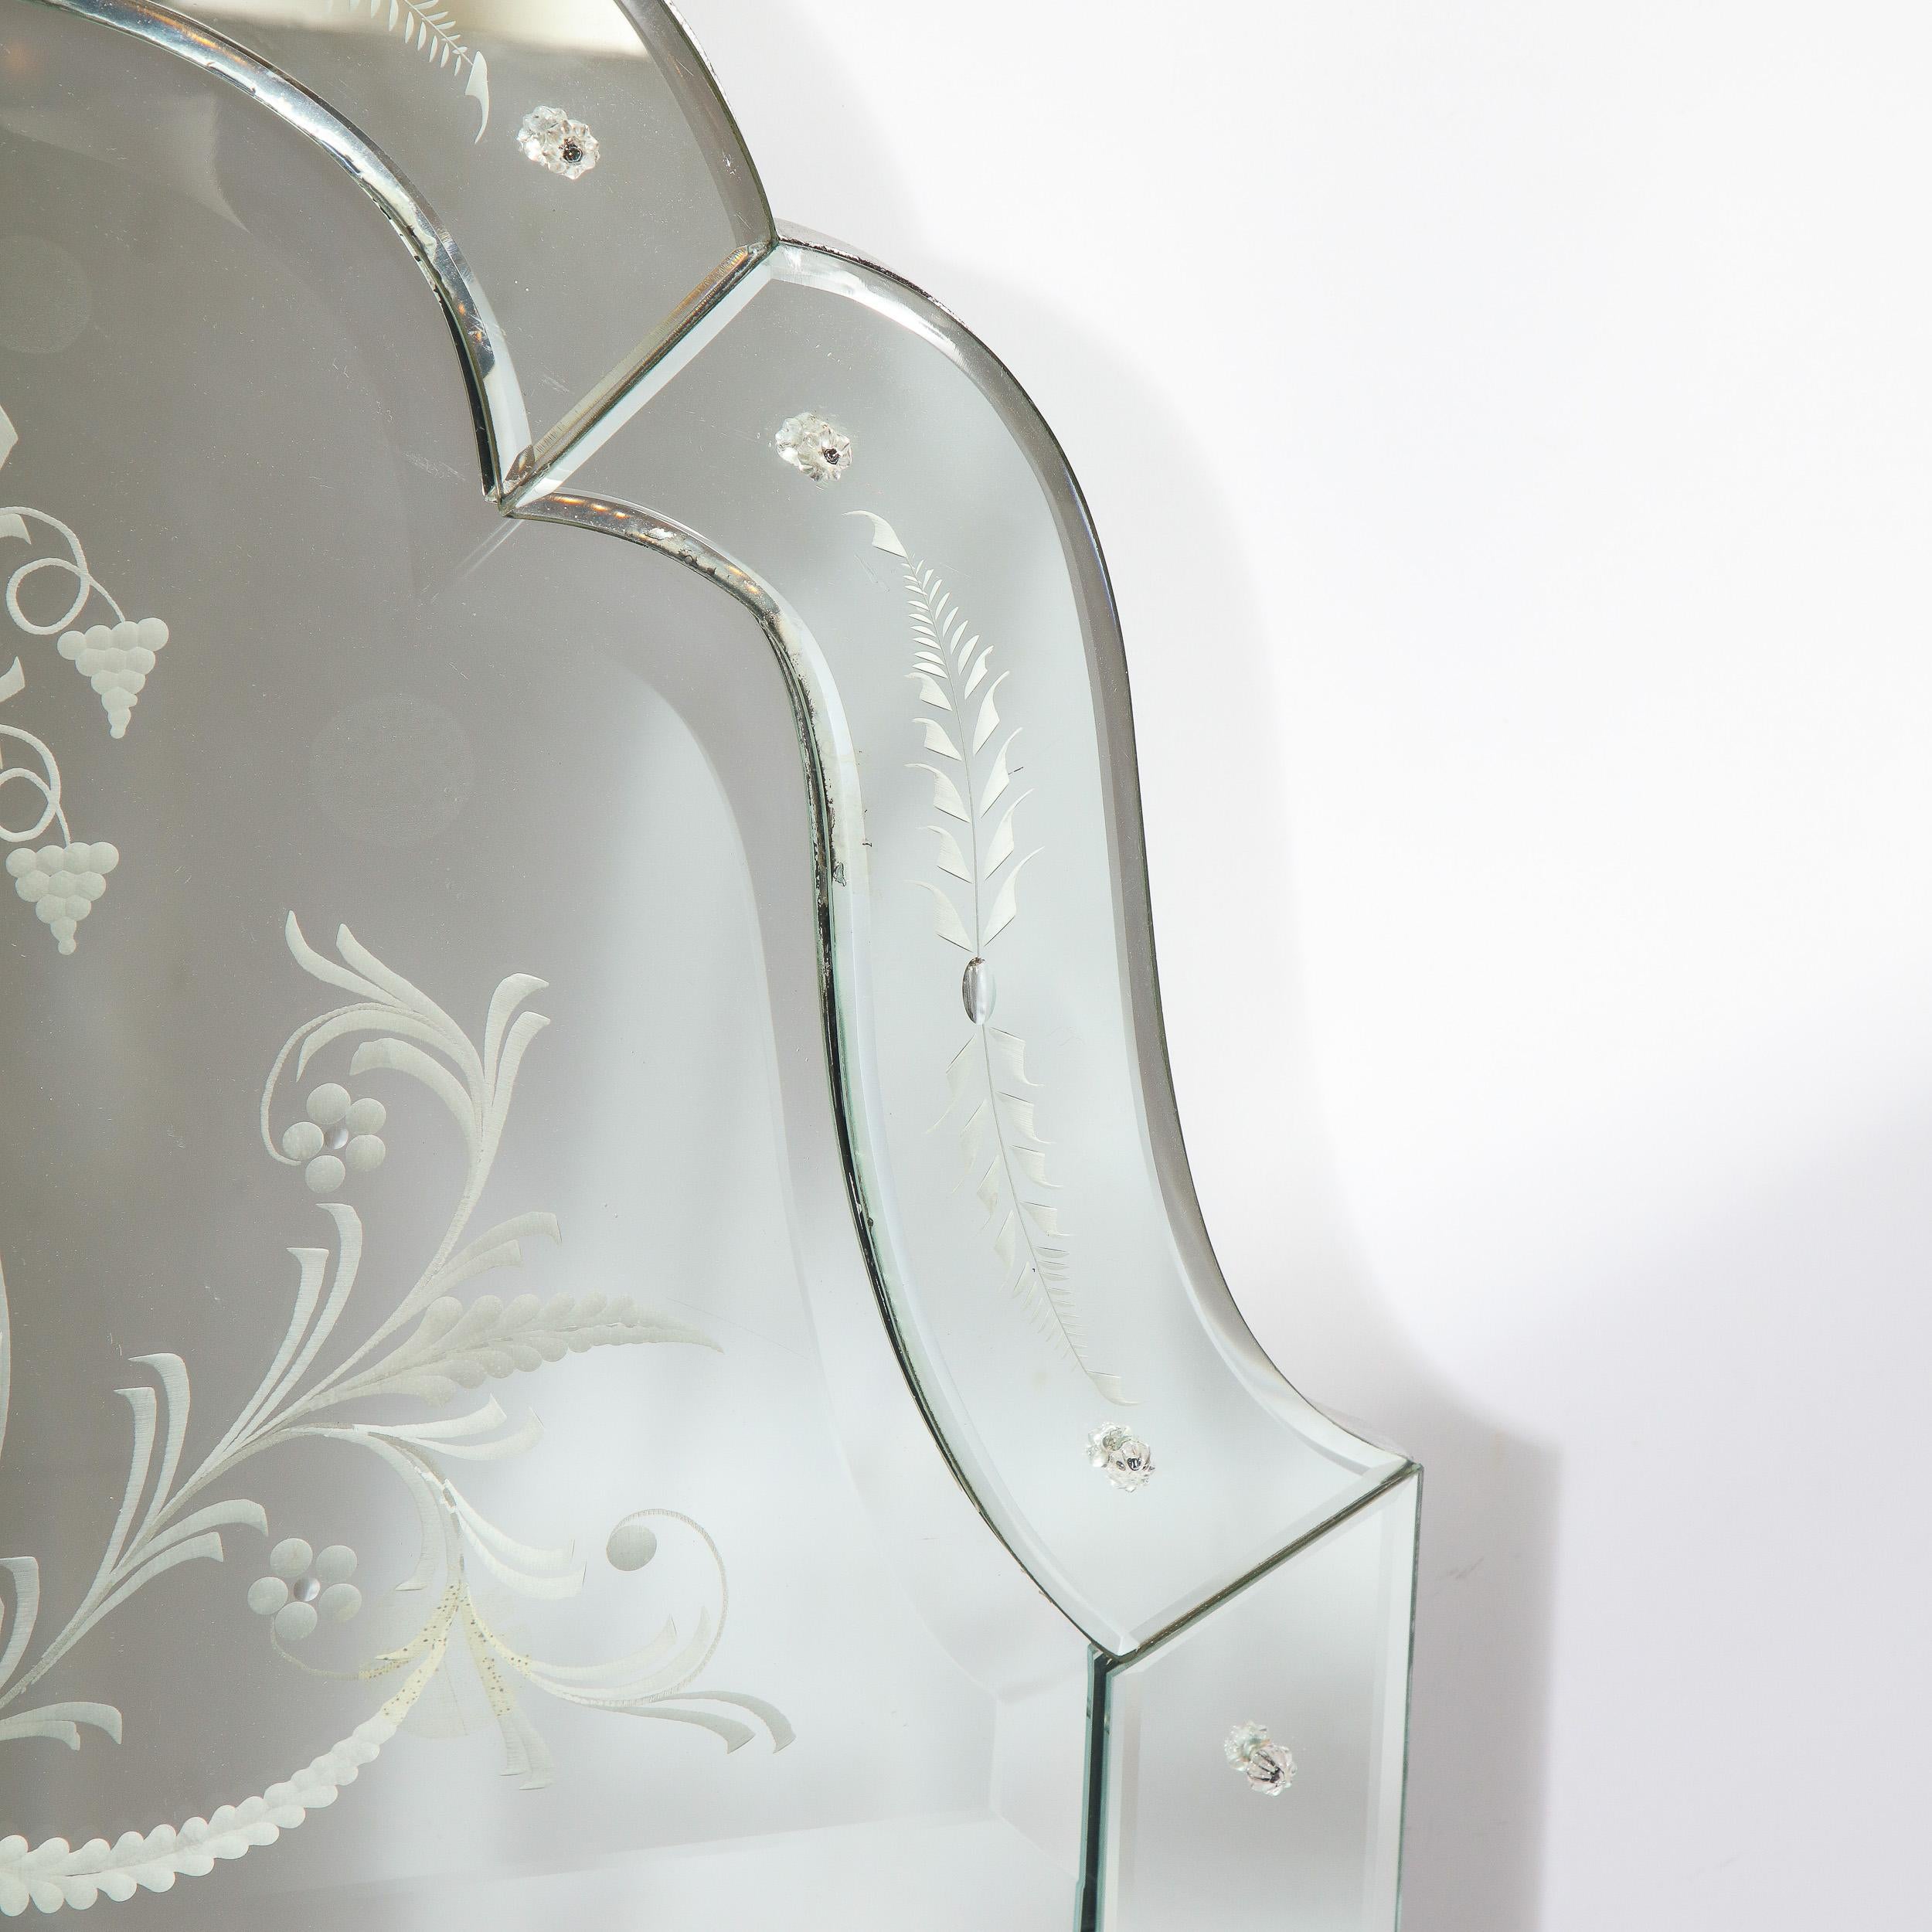 American Midcentury Neoclassical Style Etched and Scalloped Mirror with Foliate Detailing